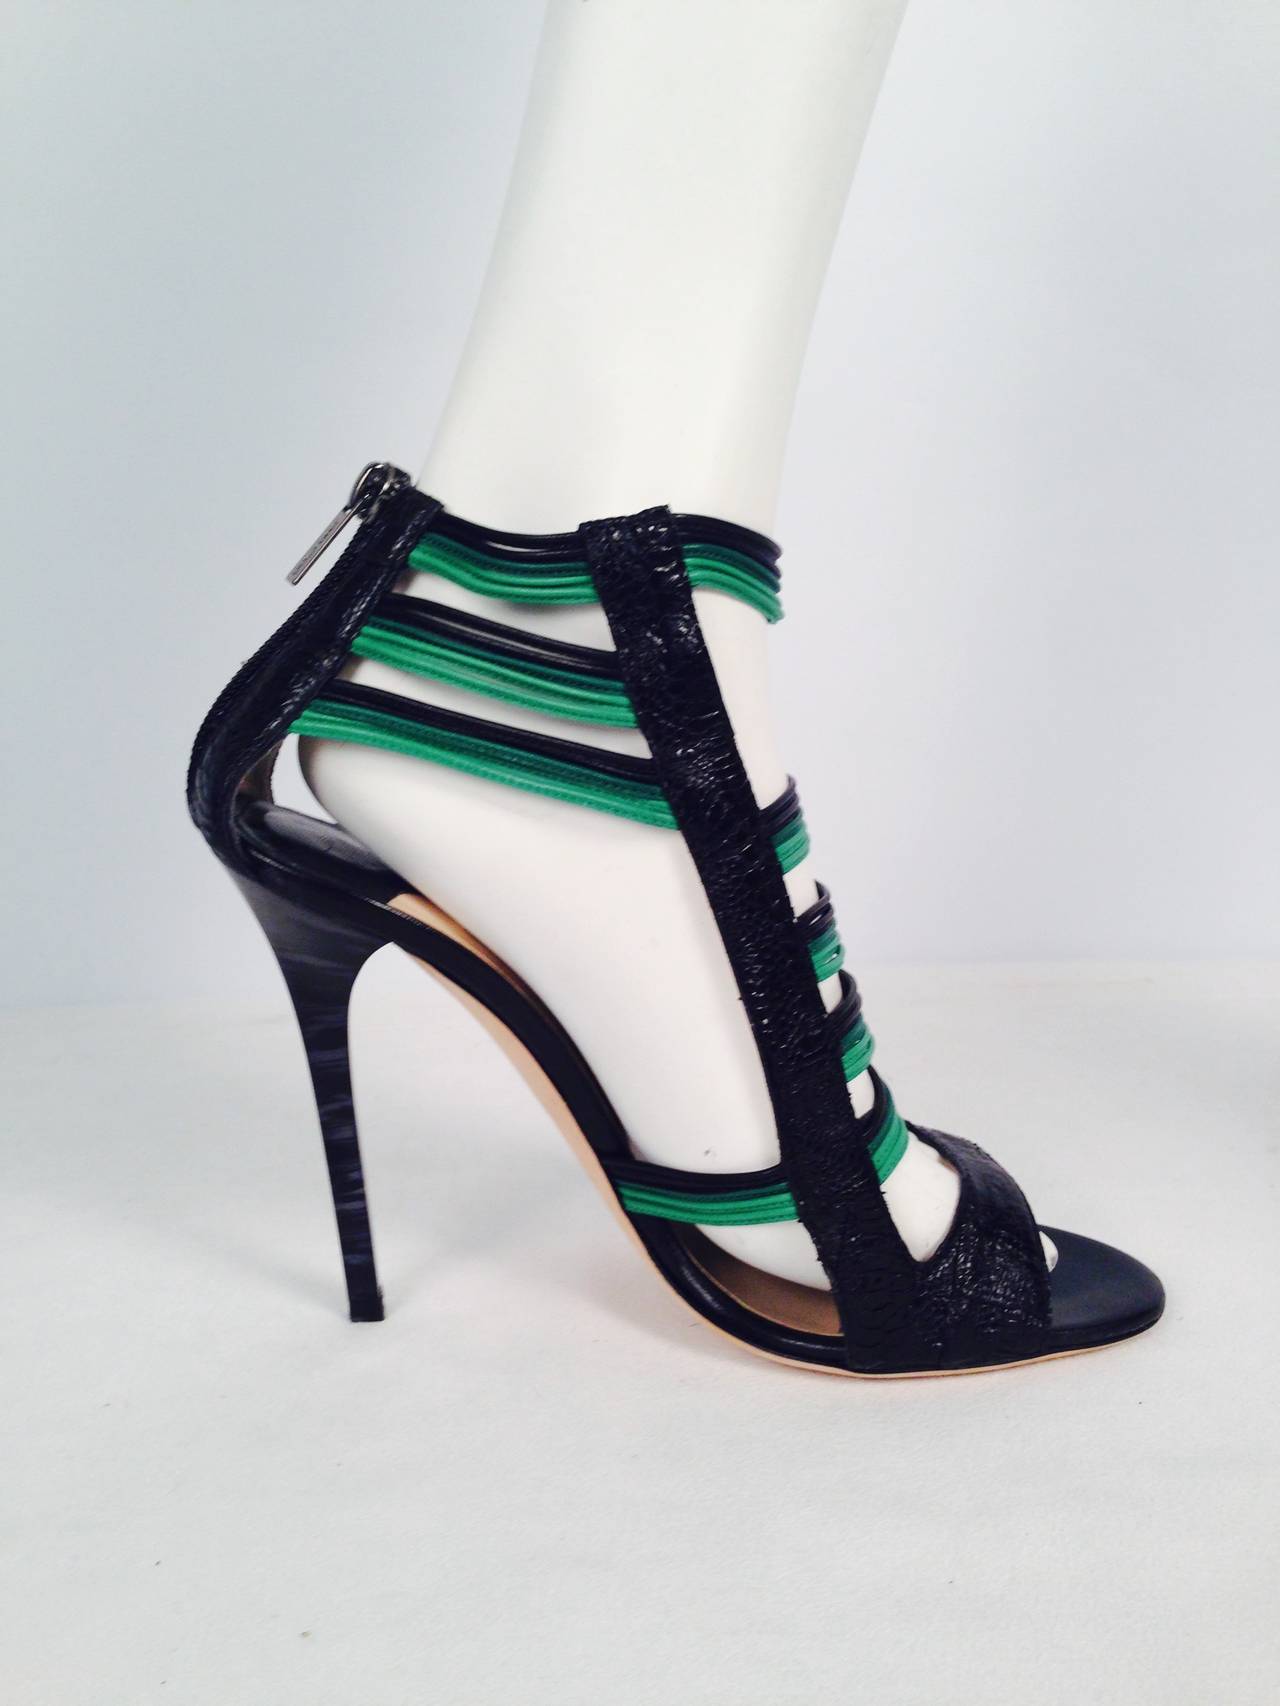 All eyes will be on your feet when wearing these high heel caged sandals from Jimmy Choo!  Crafted from python leather, these open-toe sandals feature basic black and glorious green straps across the feet.  Rear zip fastenings on the heel counters